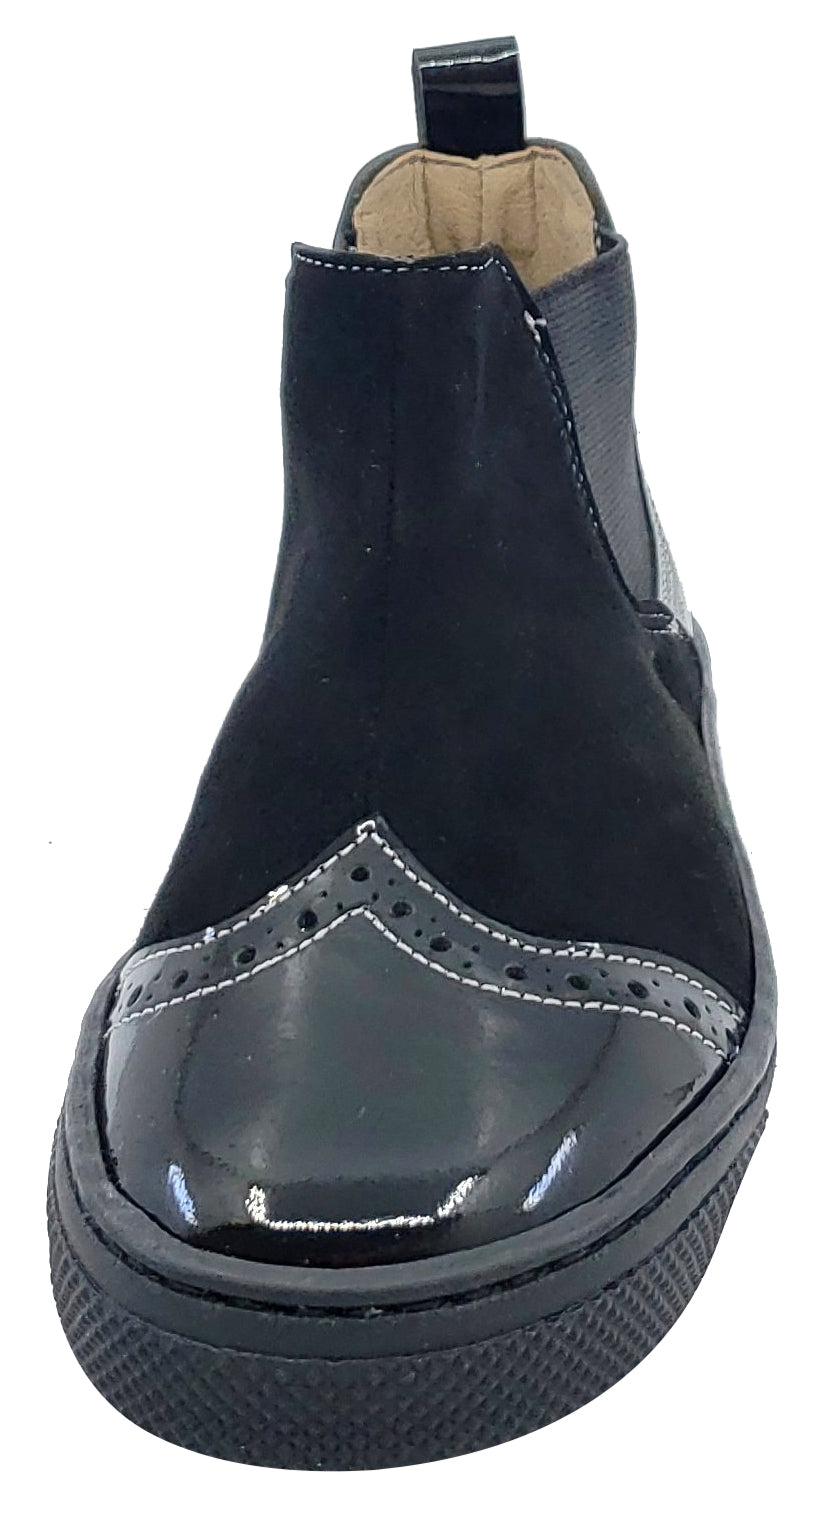 Maria Catalan for Boy's and Girl's Black Patent Suede Leather Elastic Sides Bootie